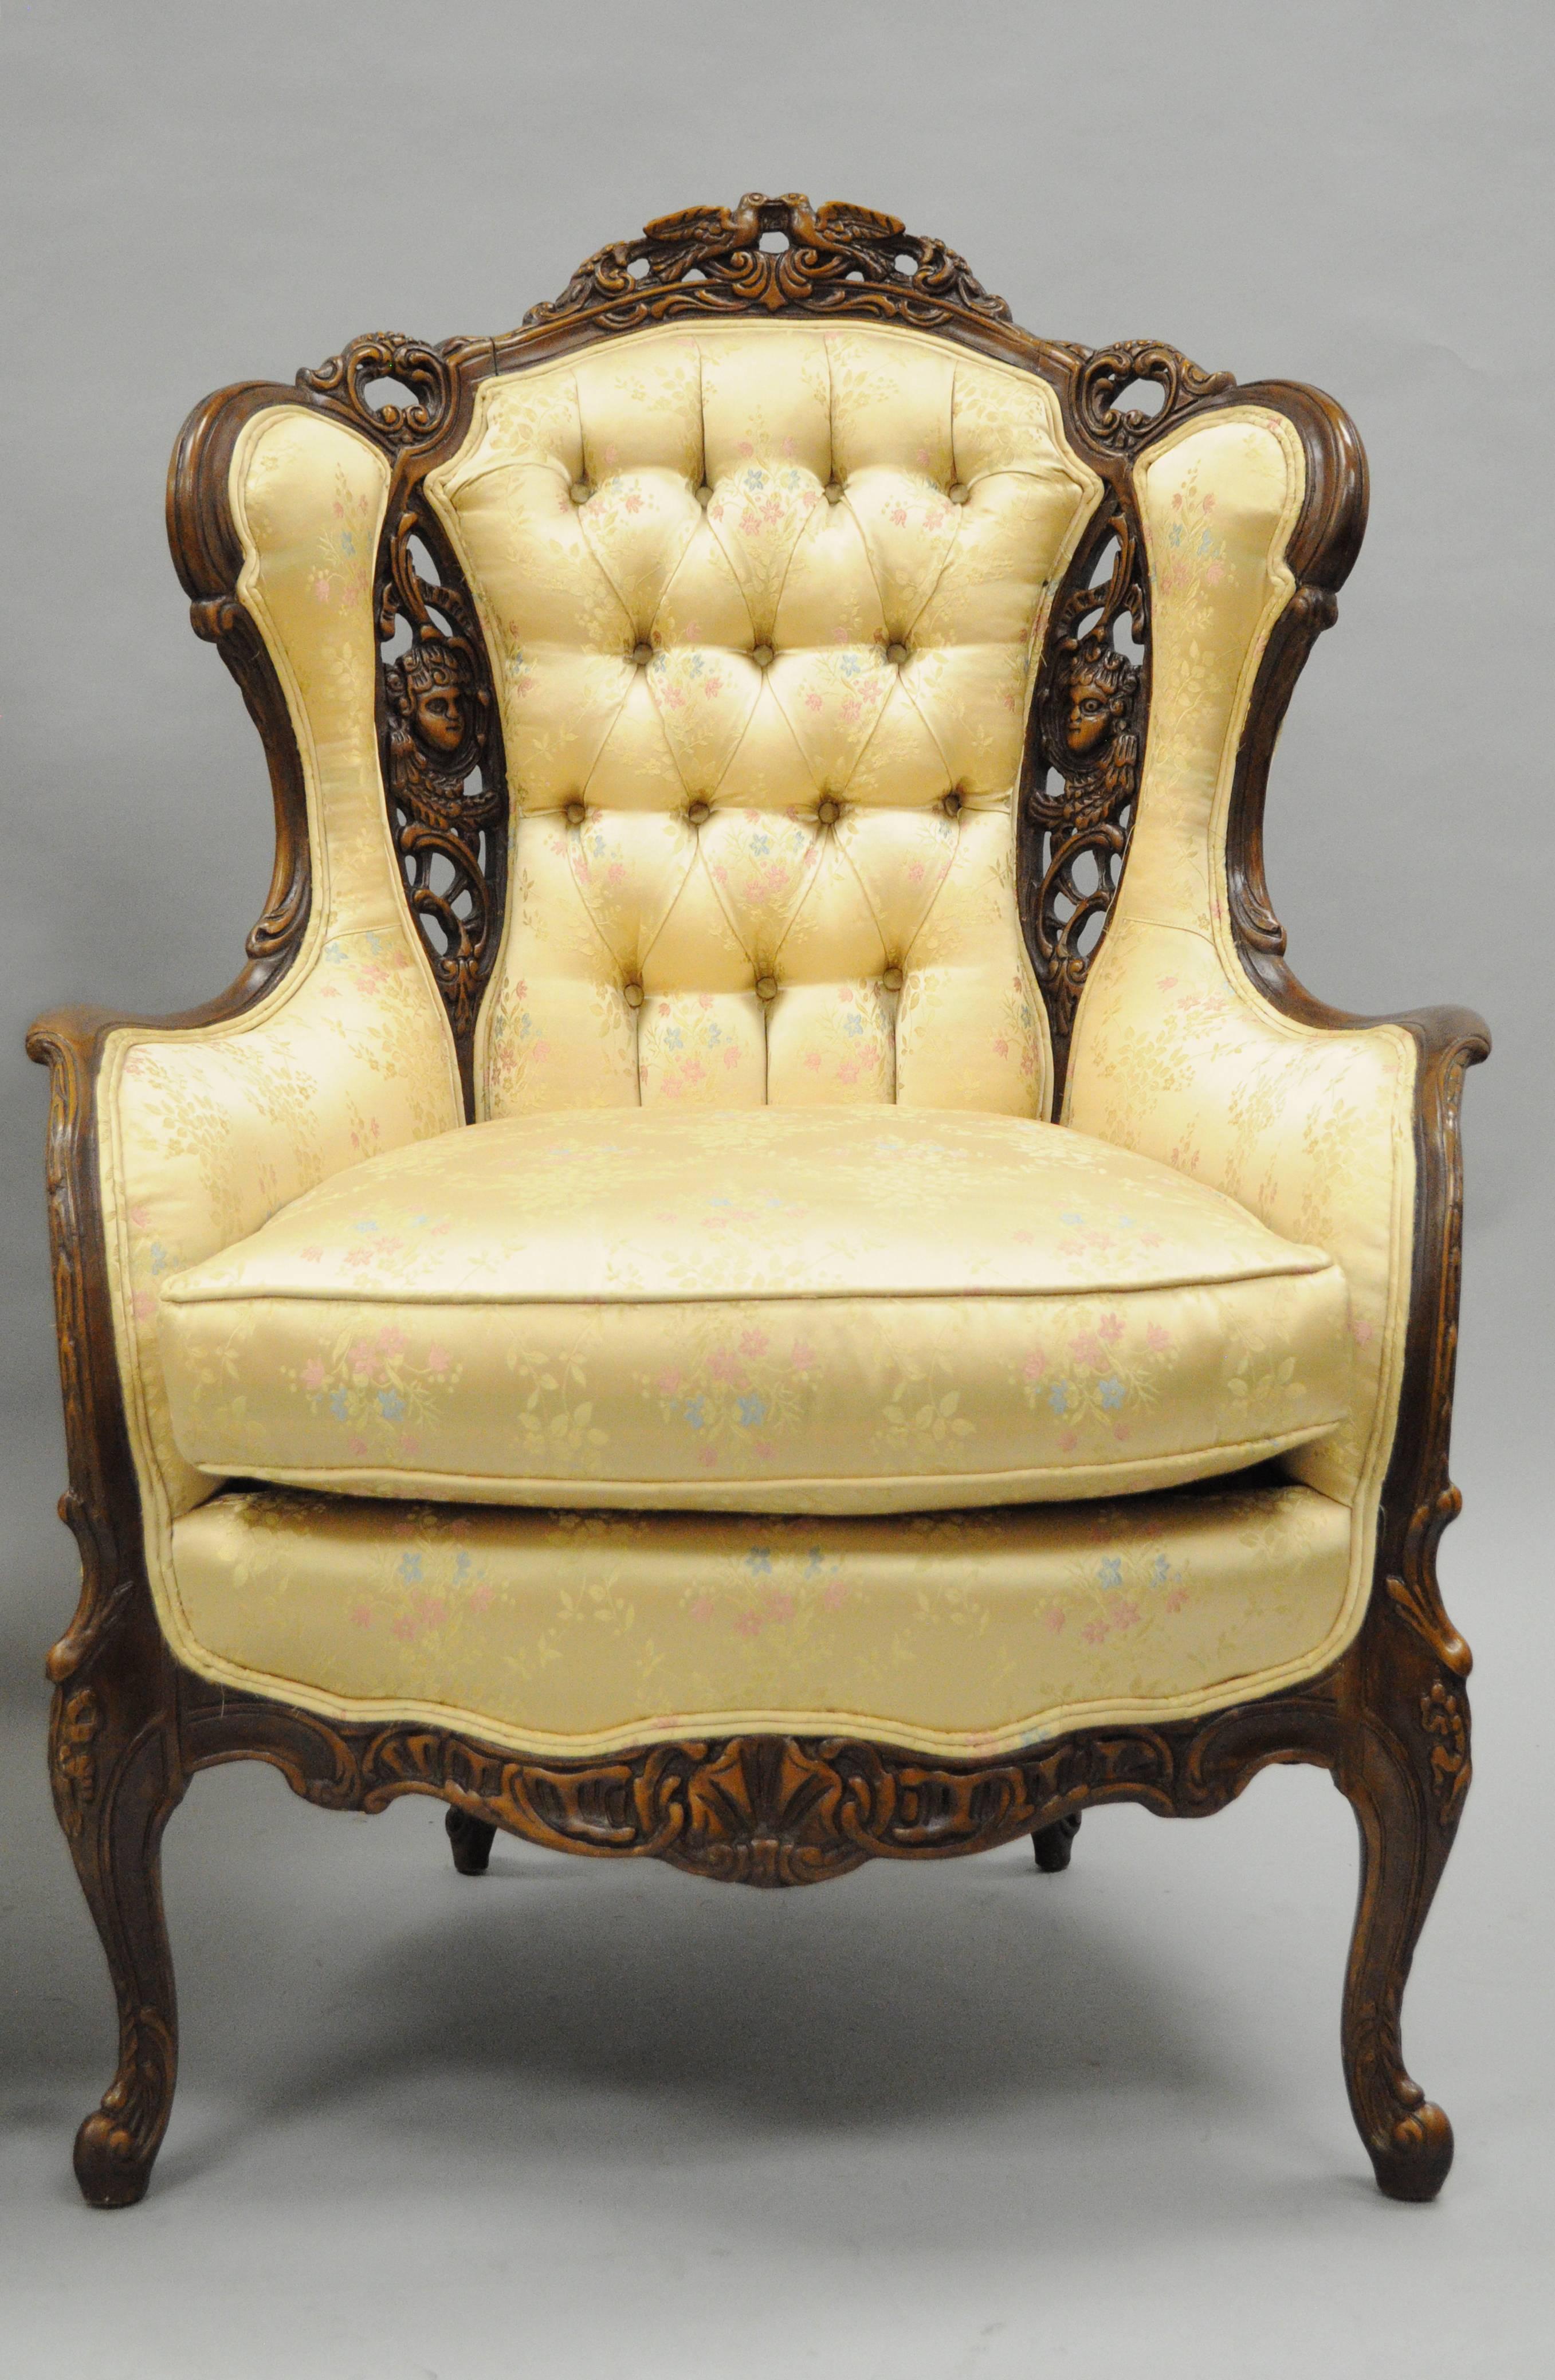 Pair of vintage carved wingback French, Louis XV style chairs with similar / complimentary carvings. Chairs feature solid carved wood frames with each chair having different carved figures, gold upholstery with rainbow stripes and blue and pink